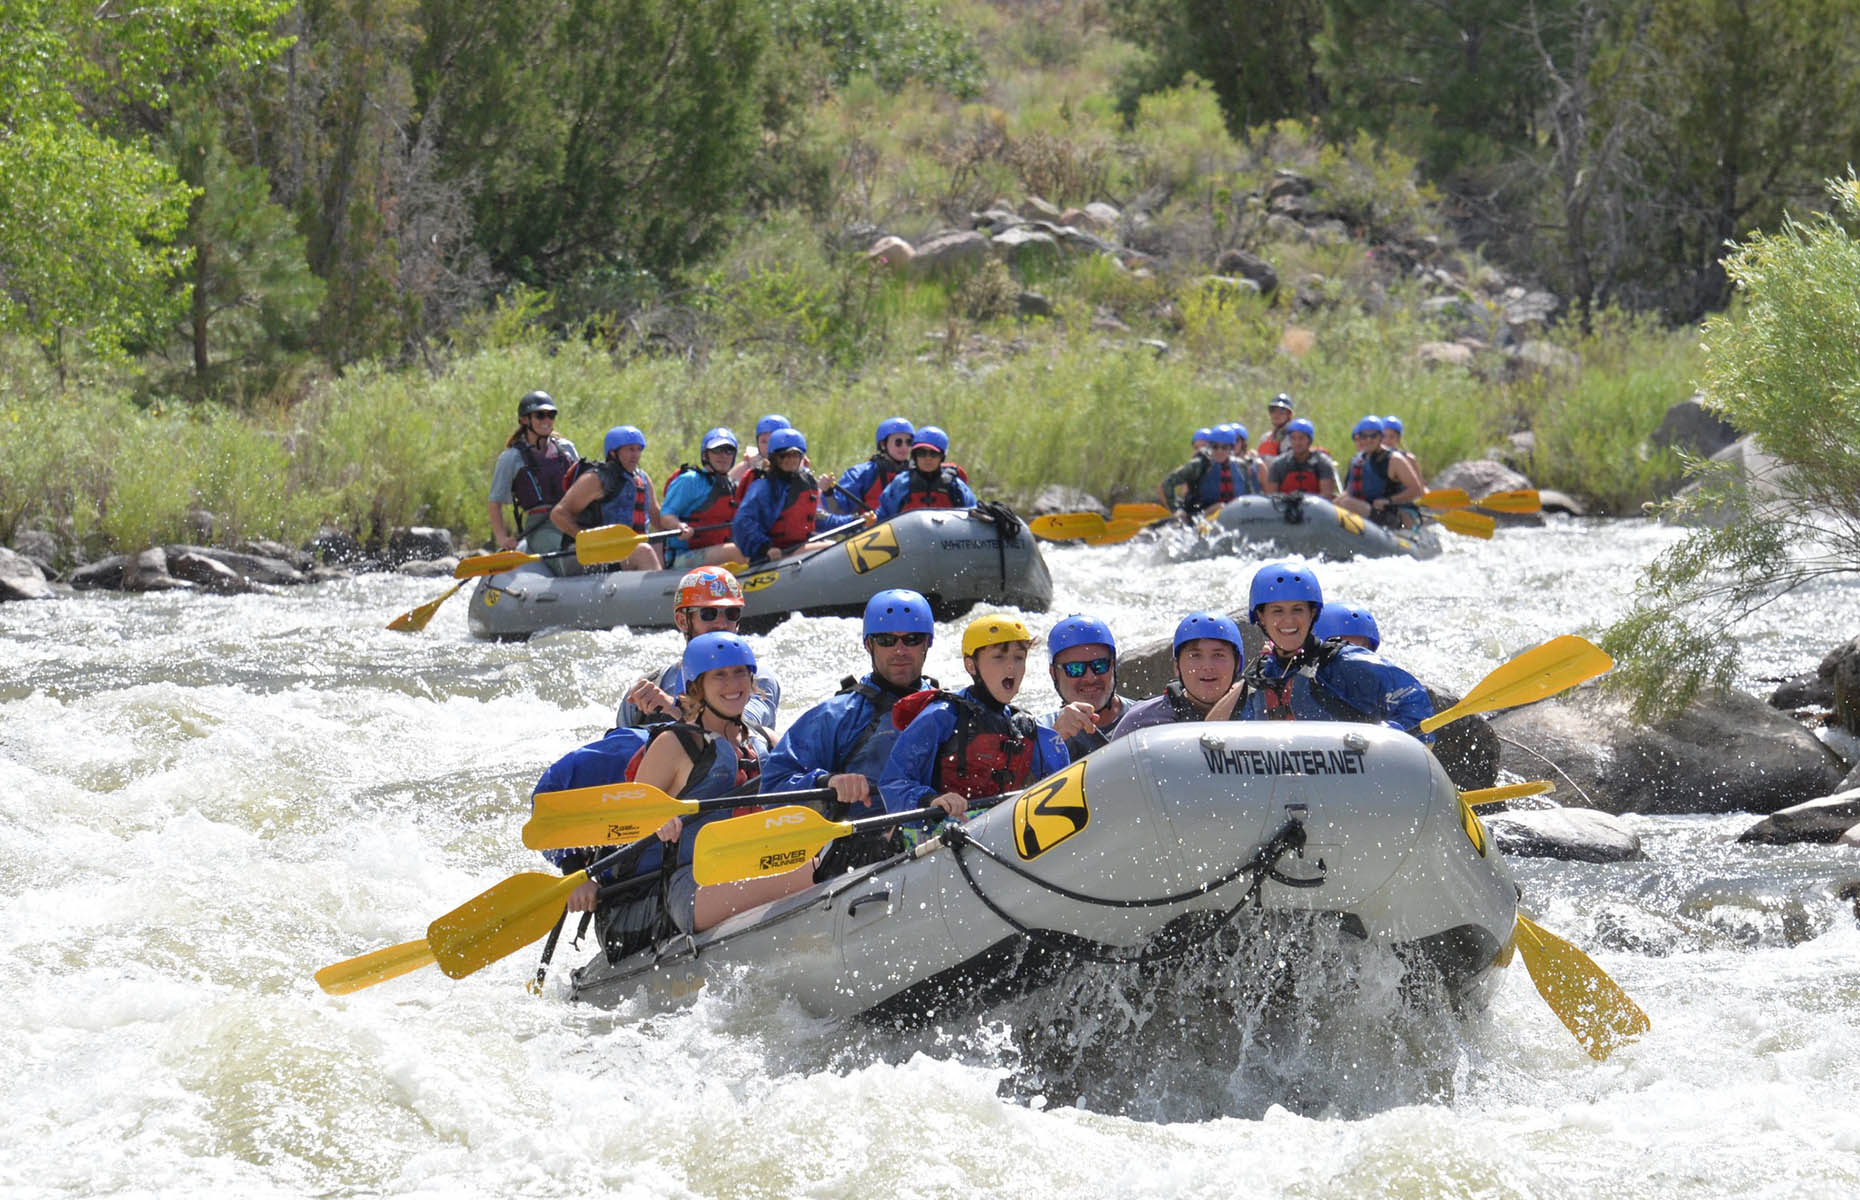 Whitewater rafting (Image: River Runners Colorado/Facebook)